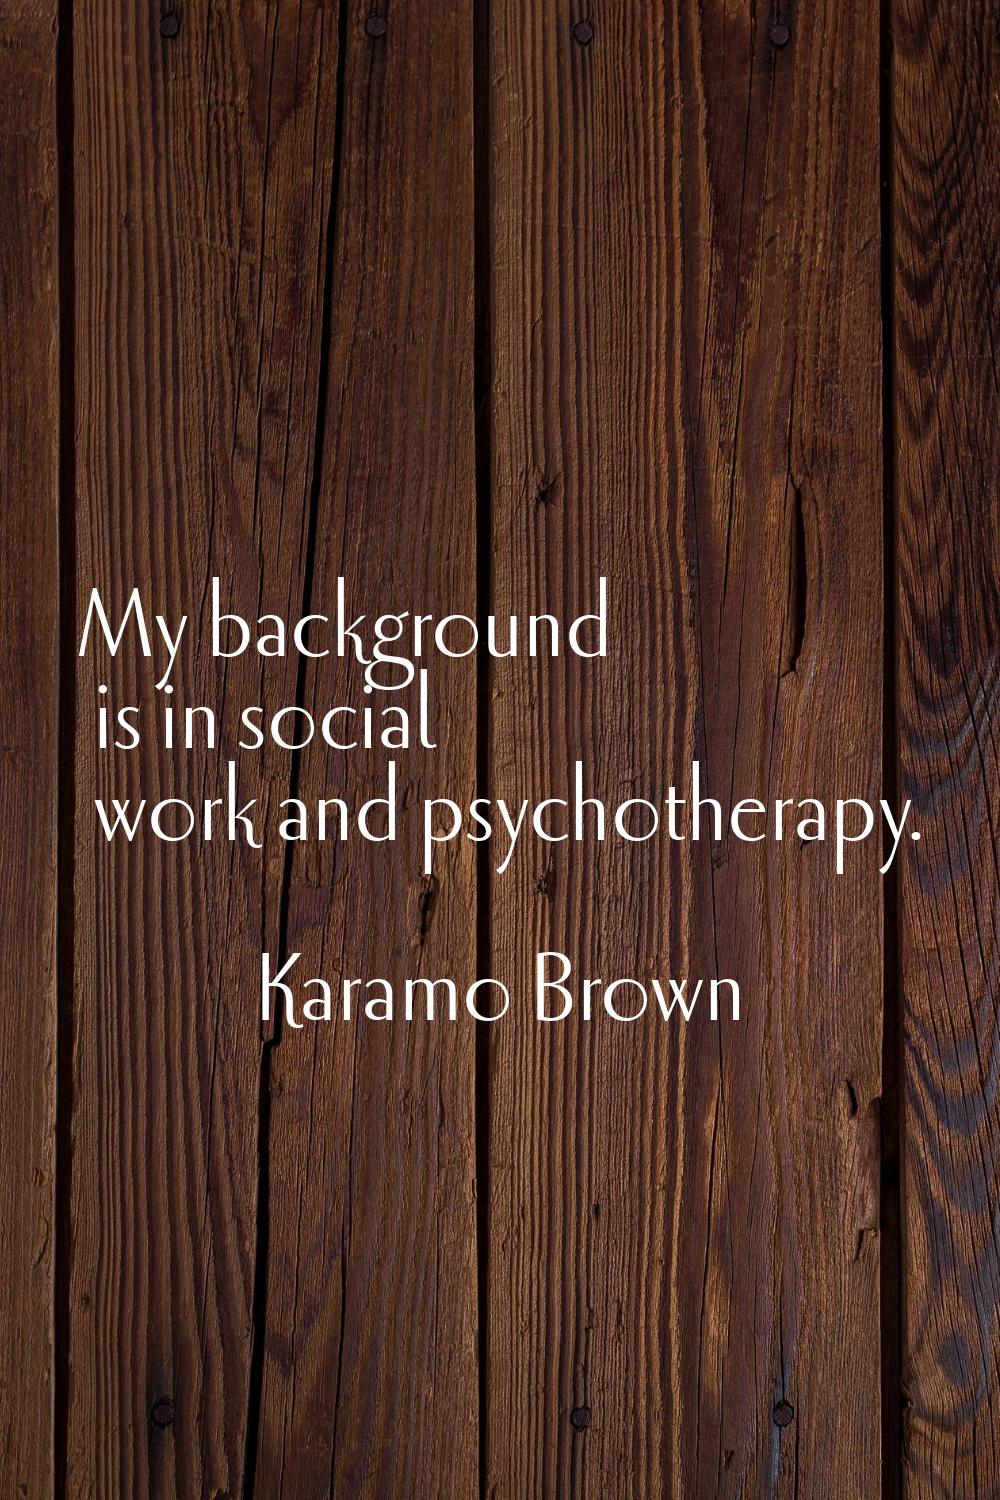 My background is in social work and psychotherapy.